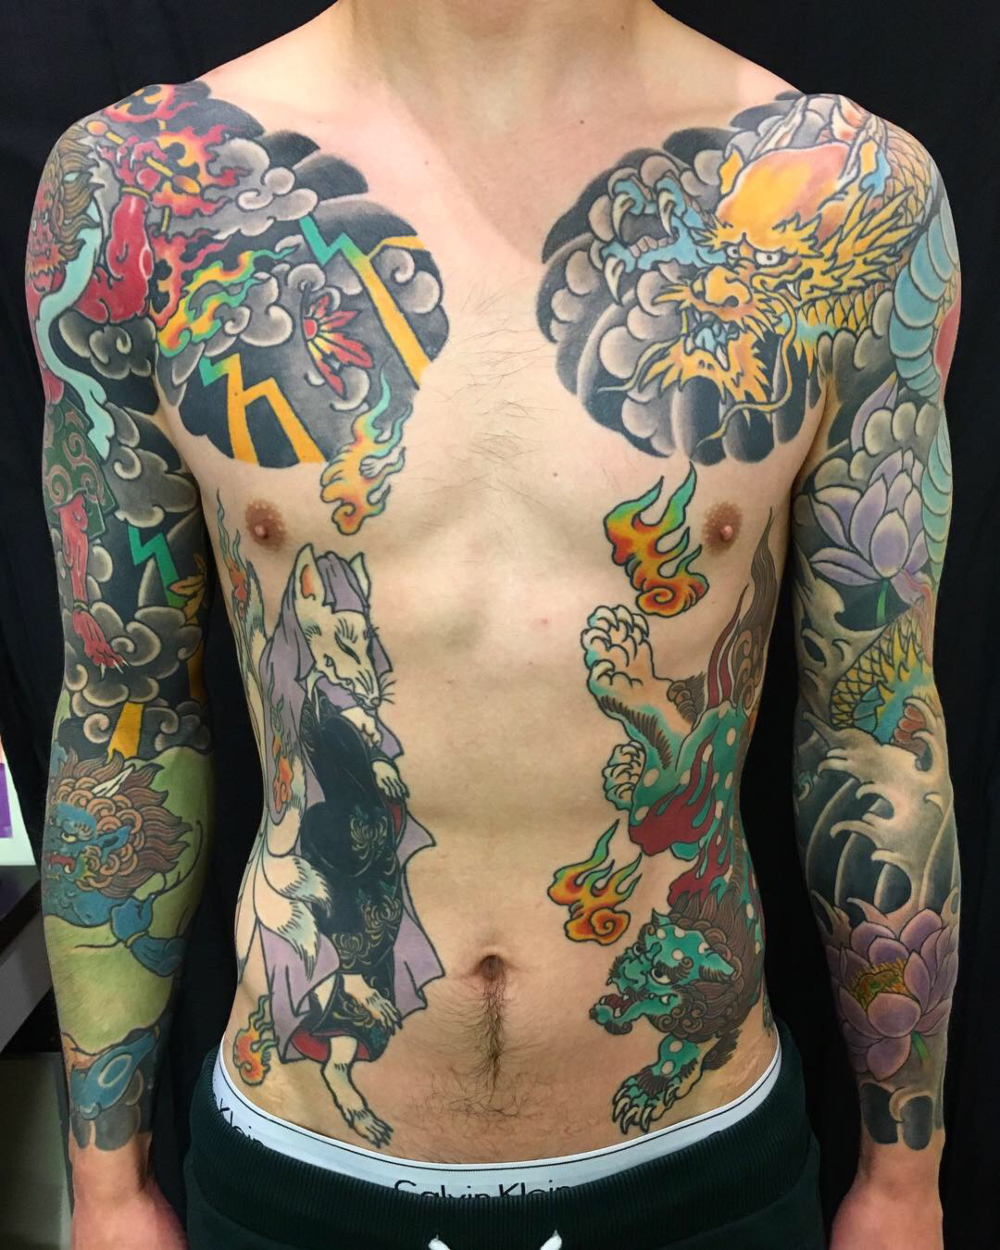 Torso tattoo in Japanese style by Kanae